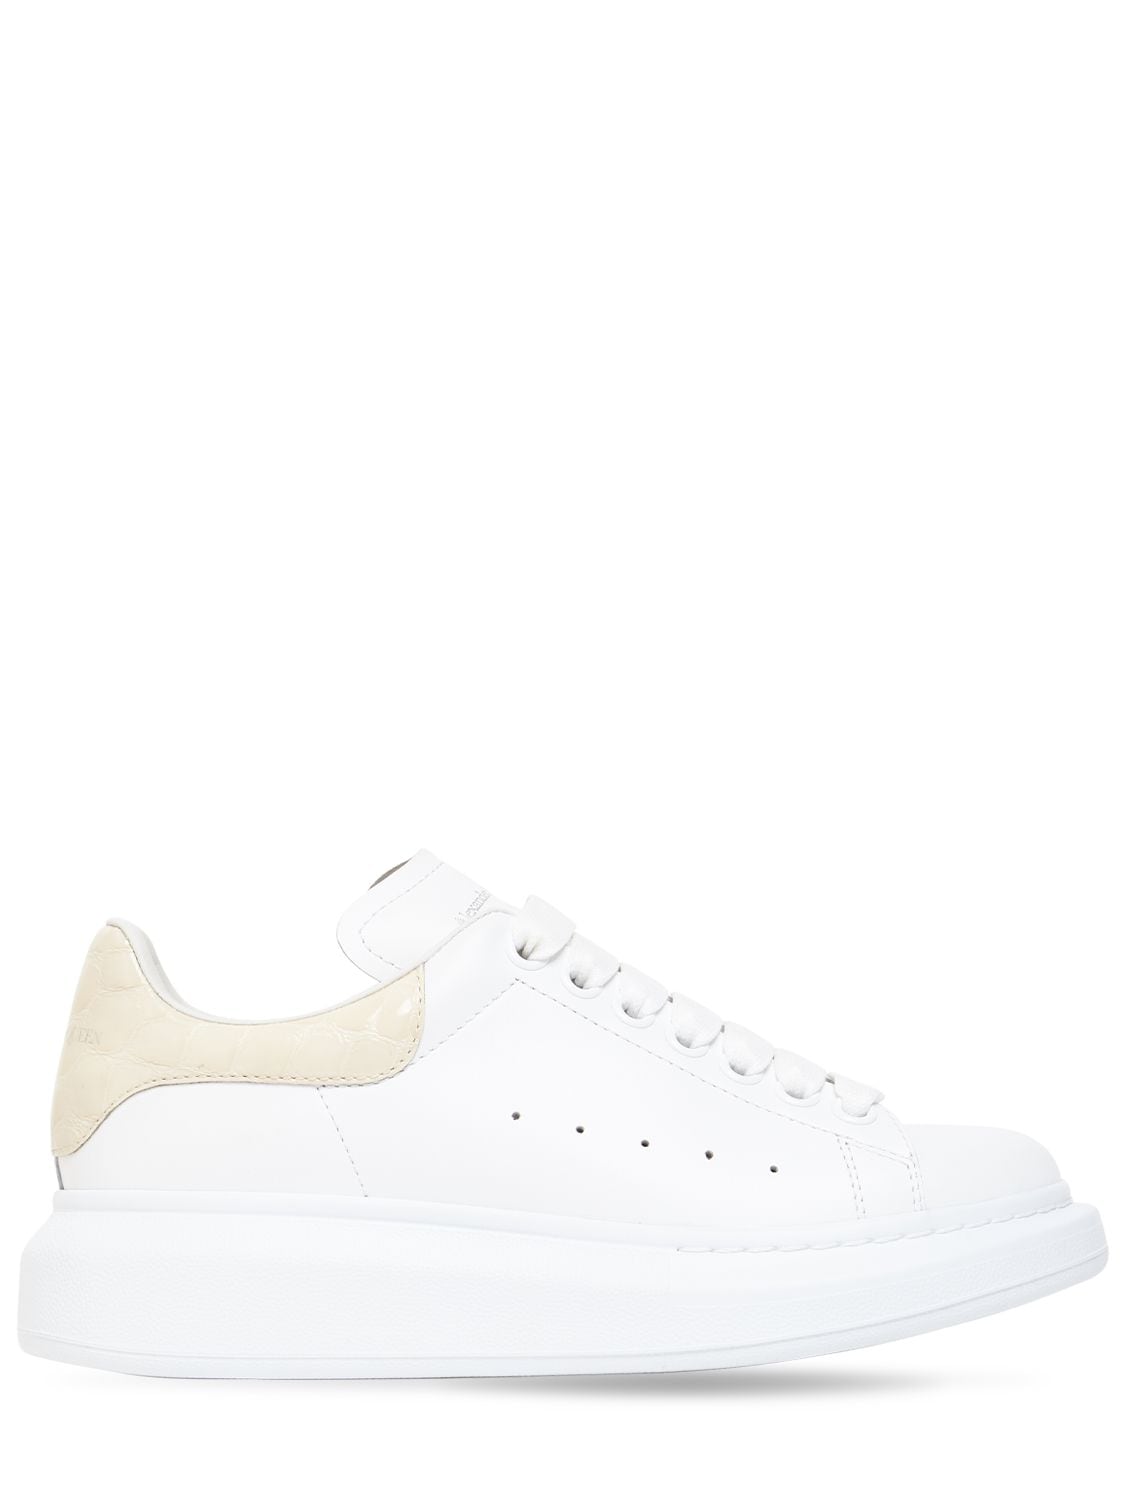 Alexander Mcqueen 40mm Leather & Croco Embossed Sneakers In White,cream